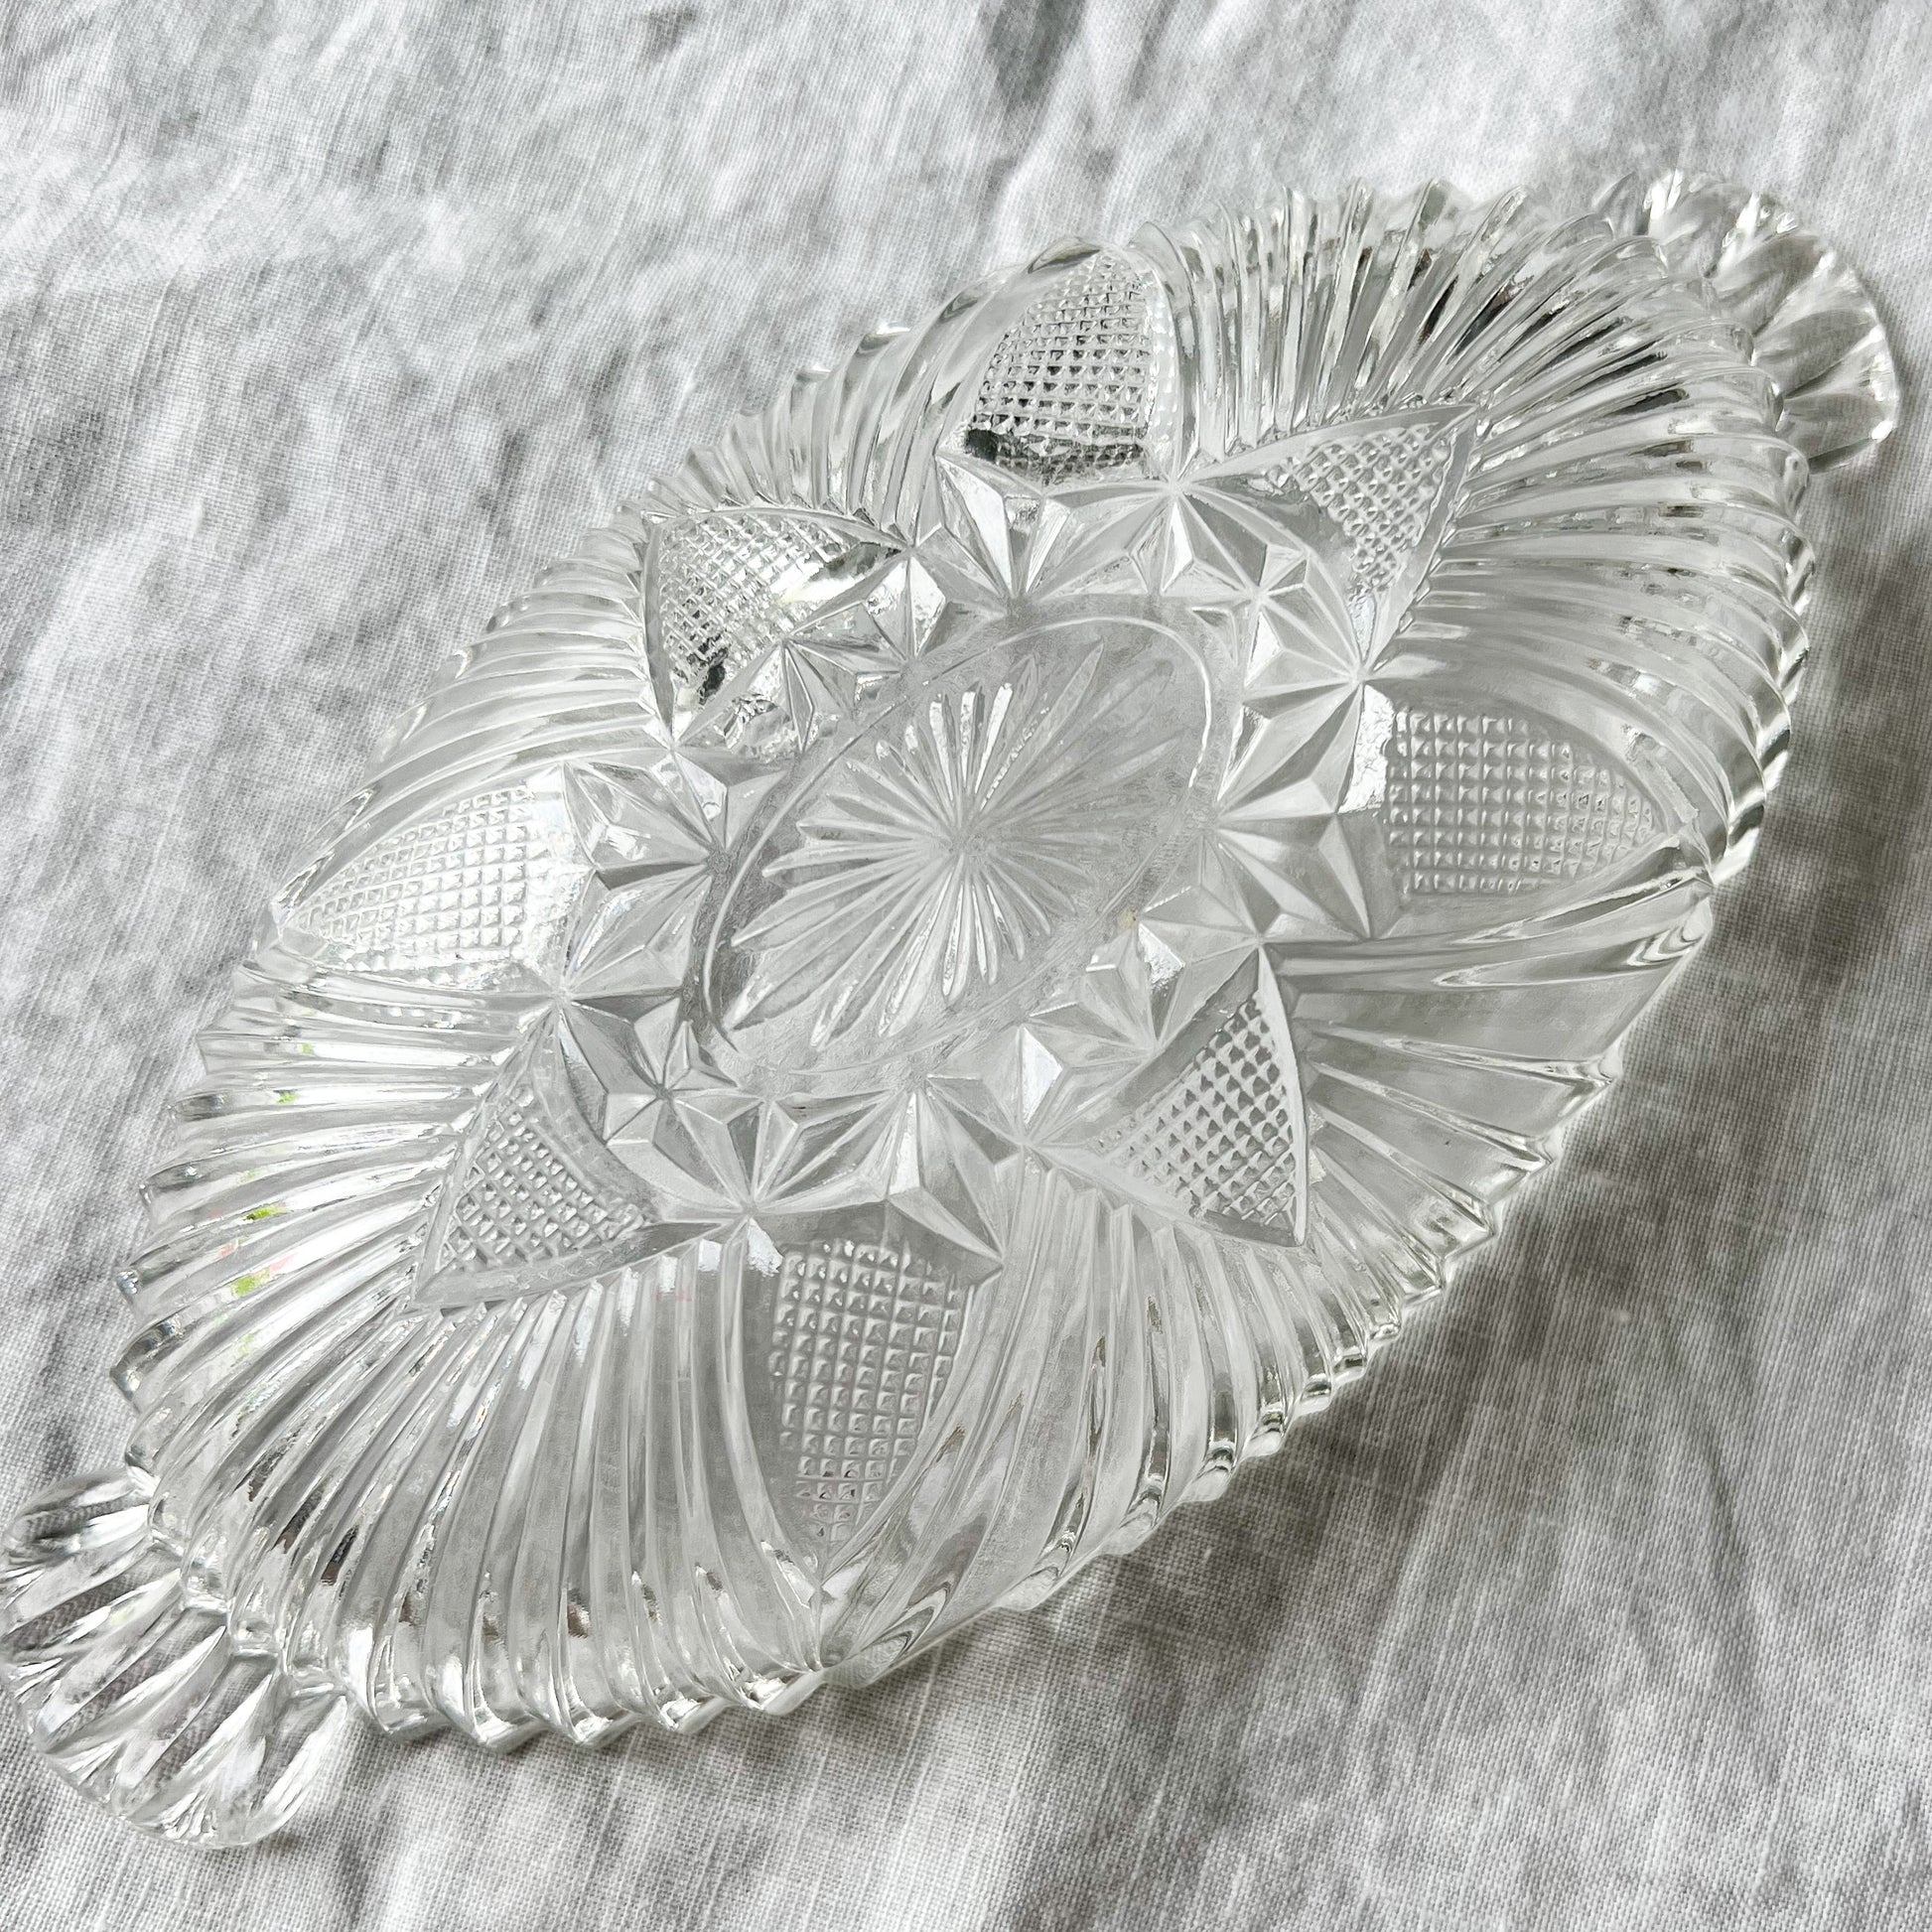 Vintage Lucky Crystal Jewelry Bowl - BelleStyle